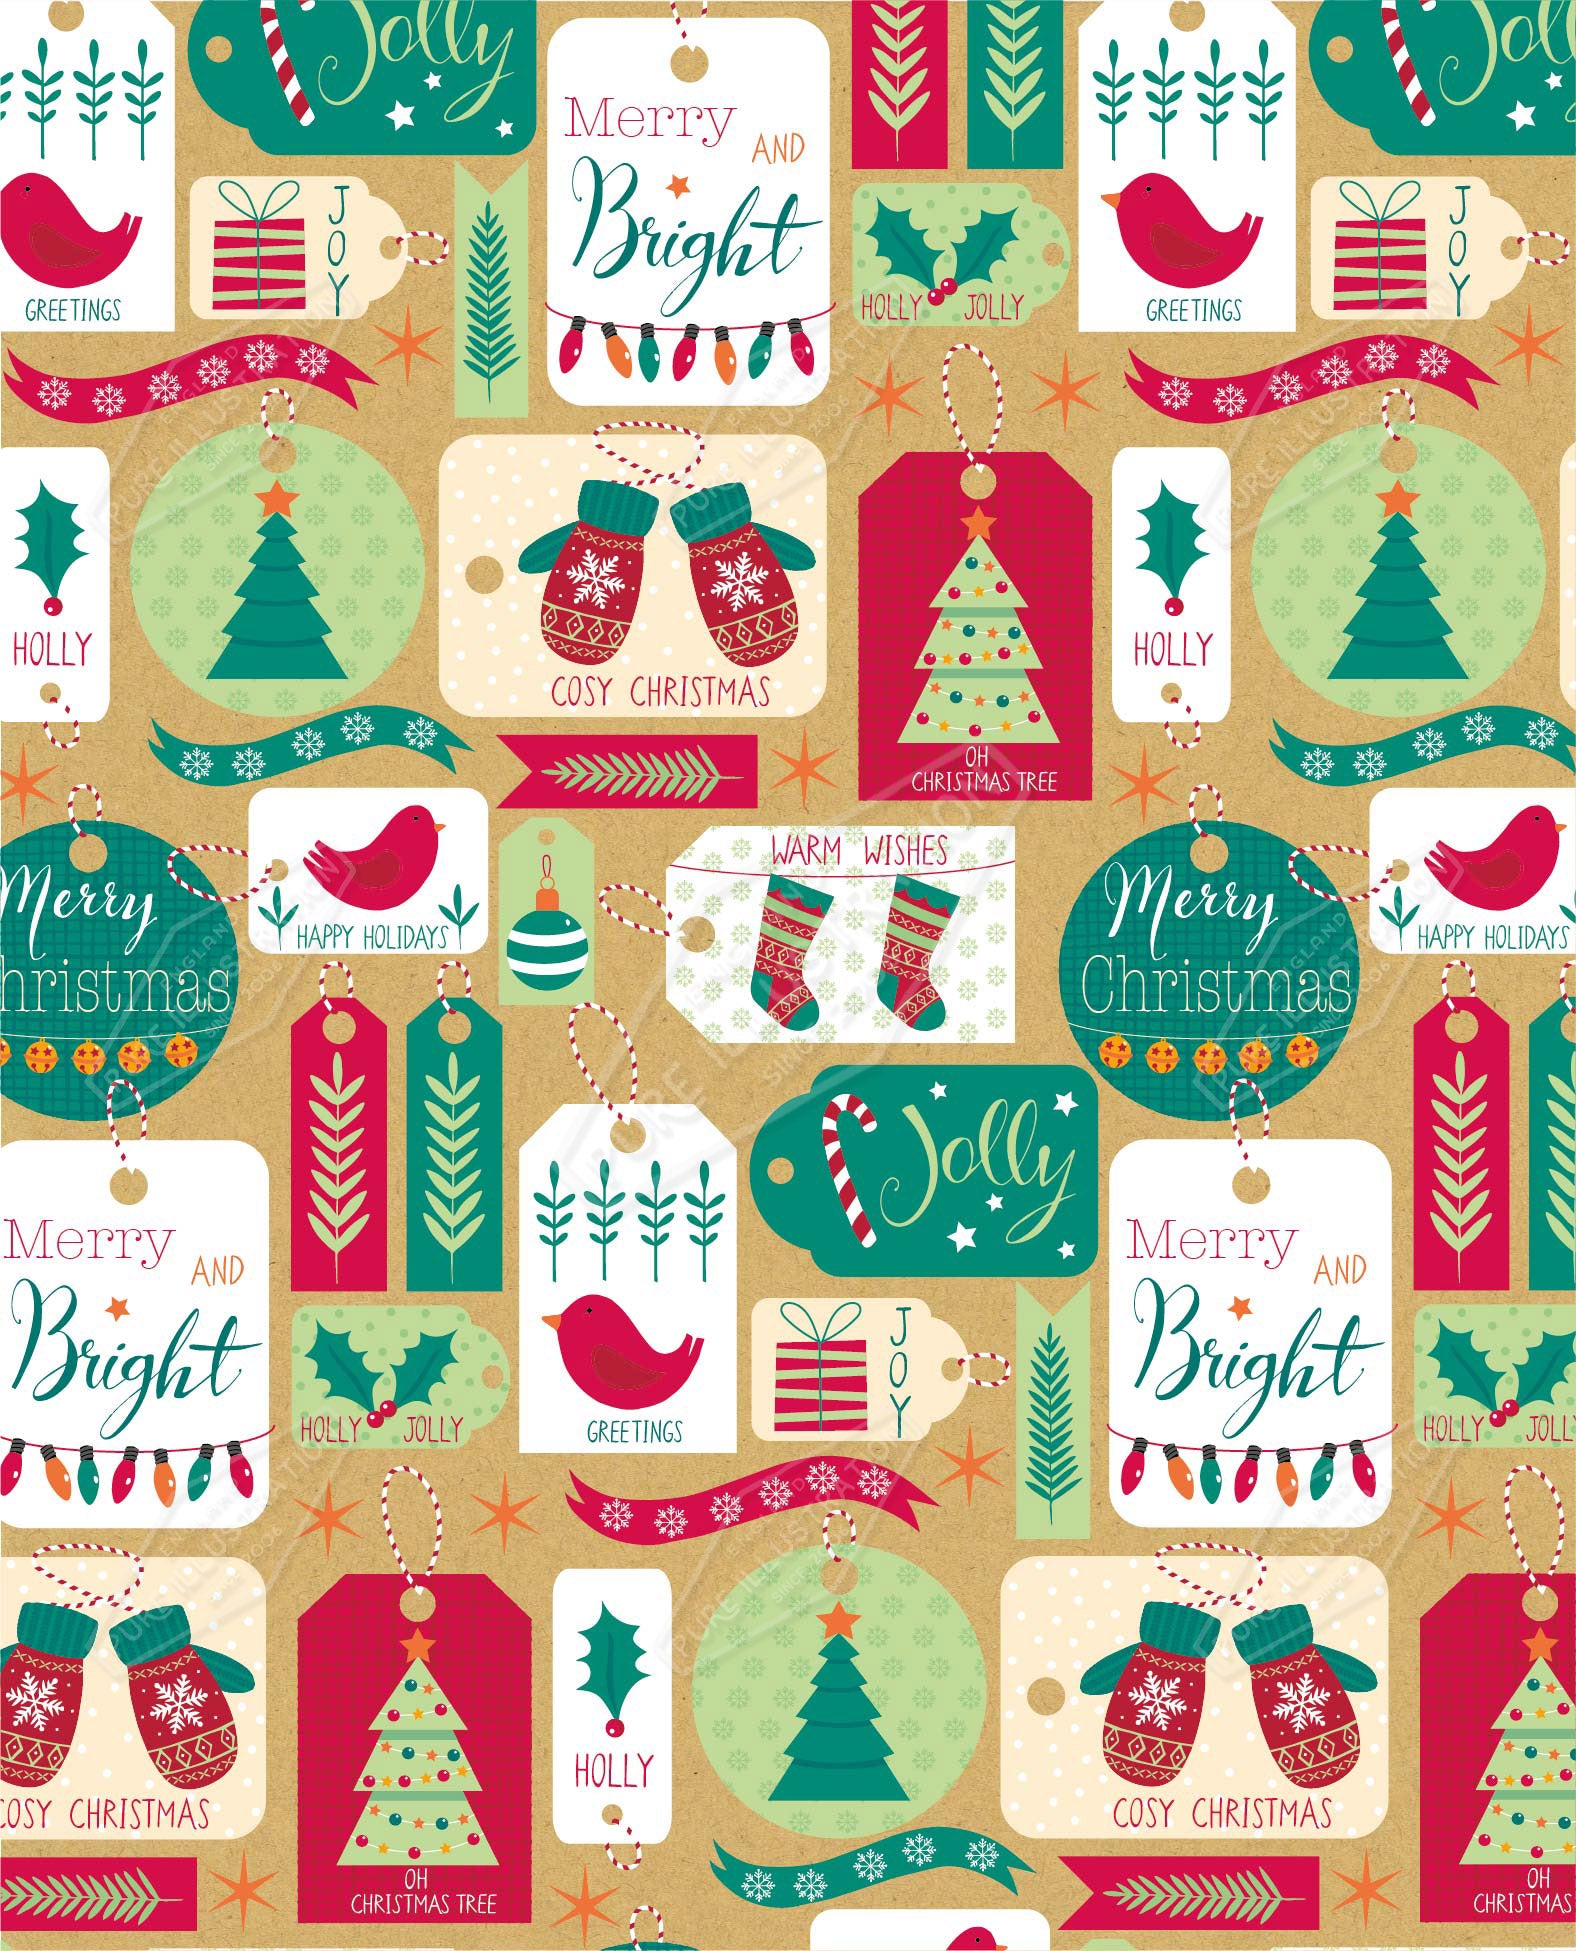 00035239SPI- Sarah Pitt is represented by Pure Art Licensing Agency - Christmas Pattern Design